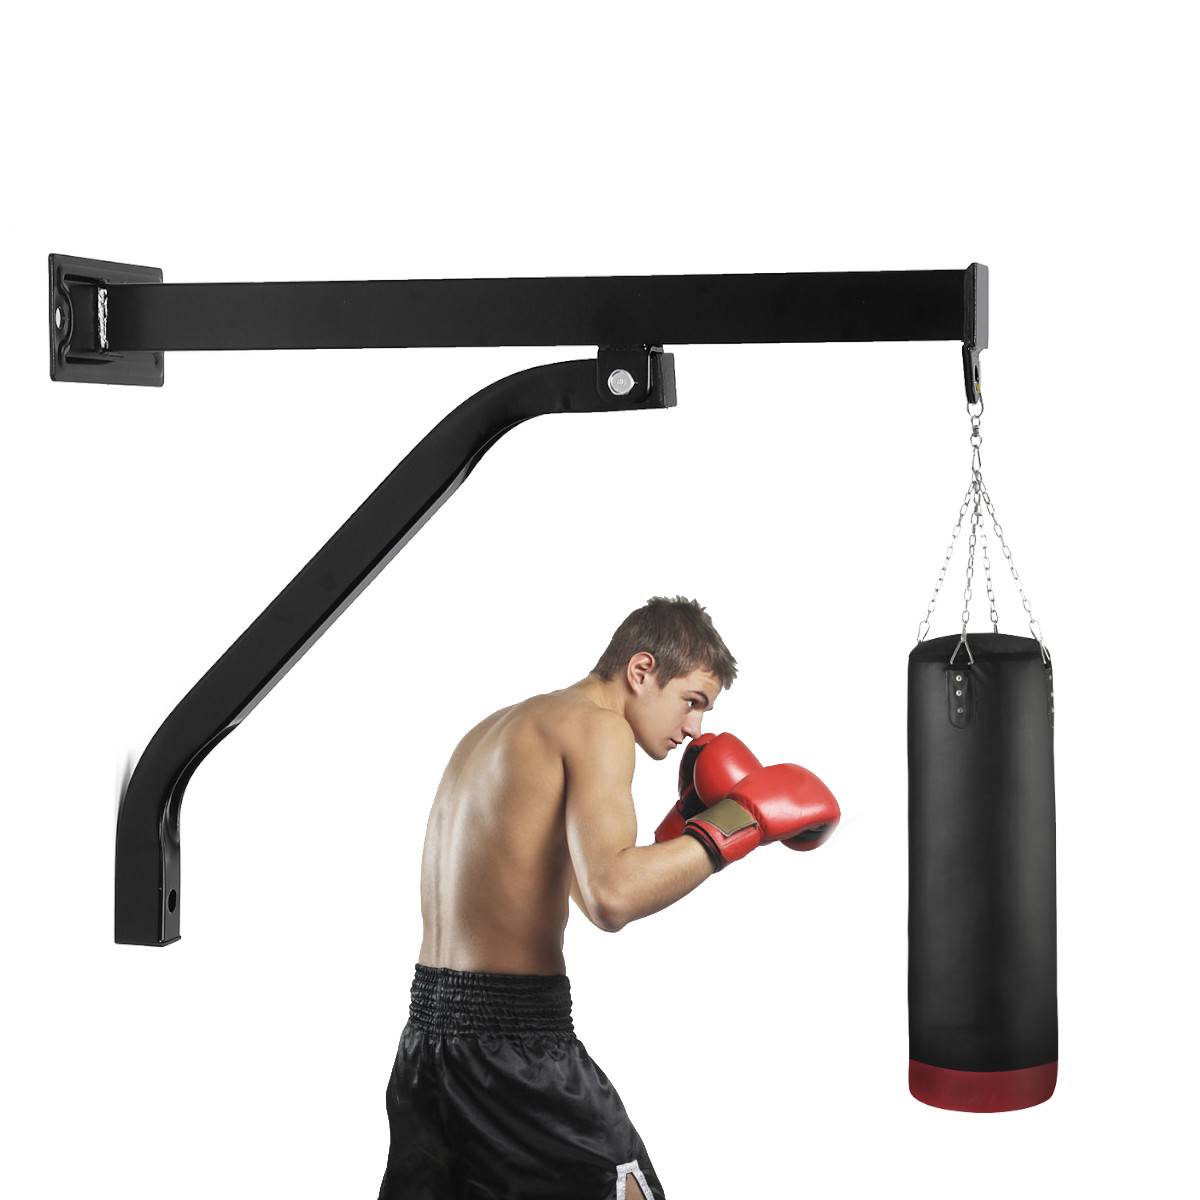 Heavy Duty Punching Bag Wall Bracket Metal Wall Mount Bracket Steel Mount Hanging Boxing Frame Stand Hanger for Fitness Training